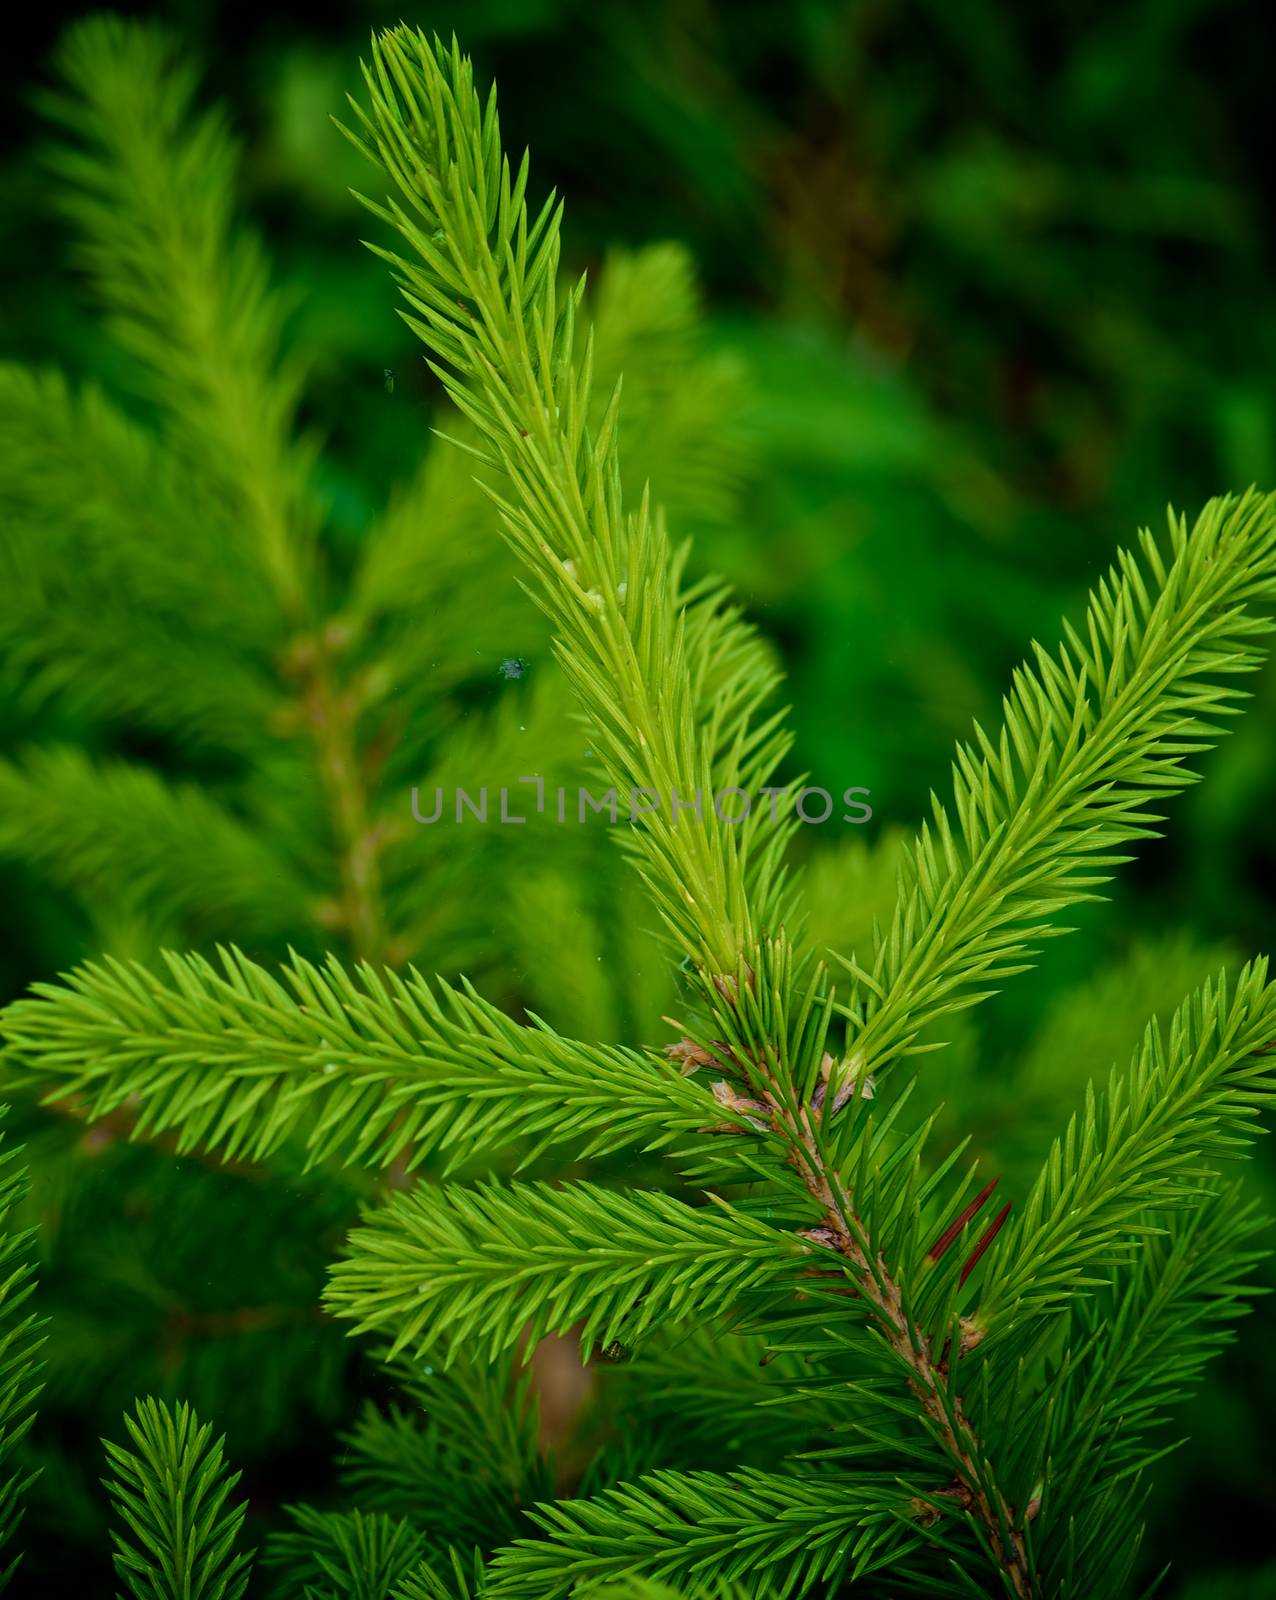 Young Spruce Shoots by zhekos